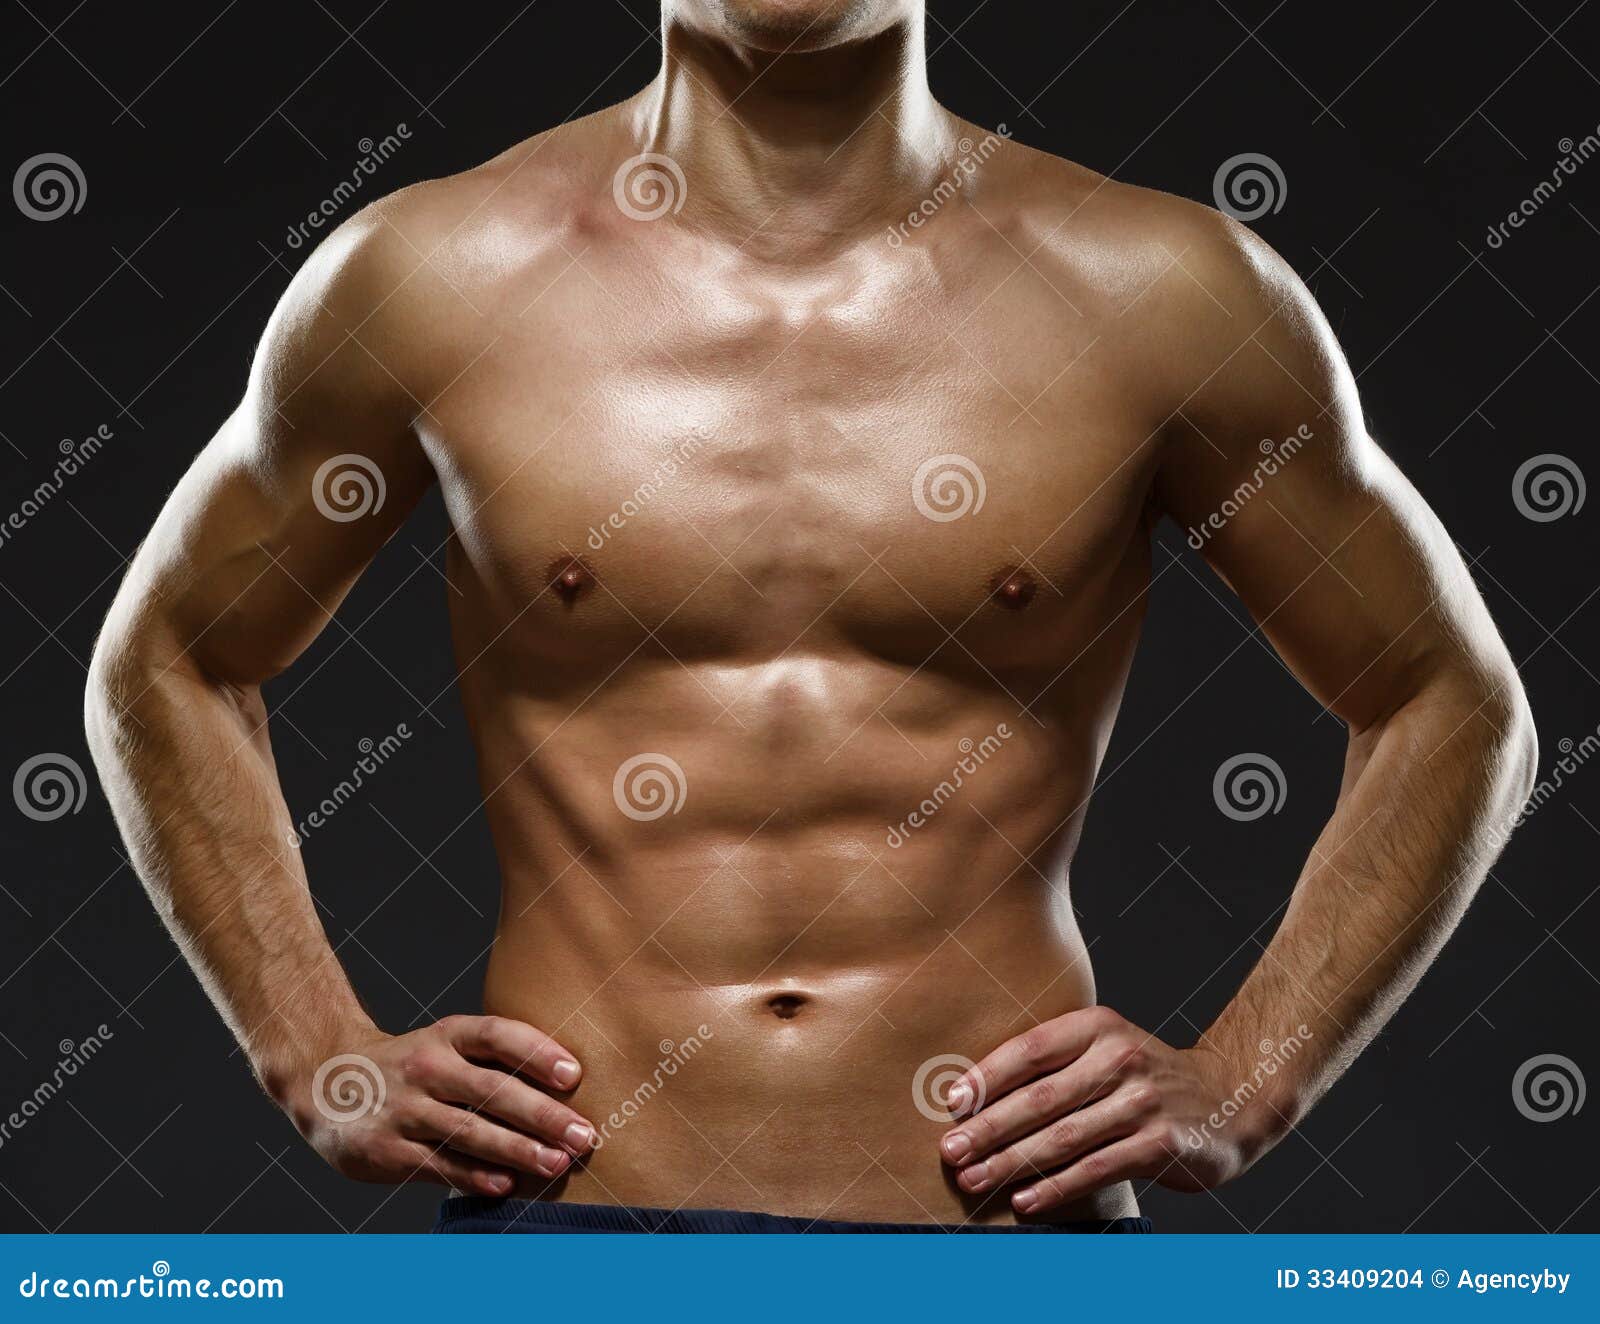 Wet Chest Of A Boy Gymnast Closeup High-Res Stock Photo 